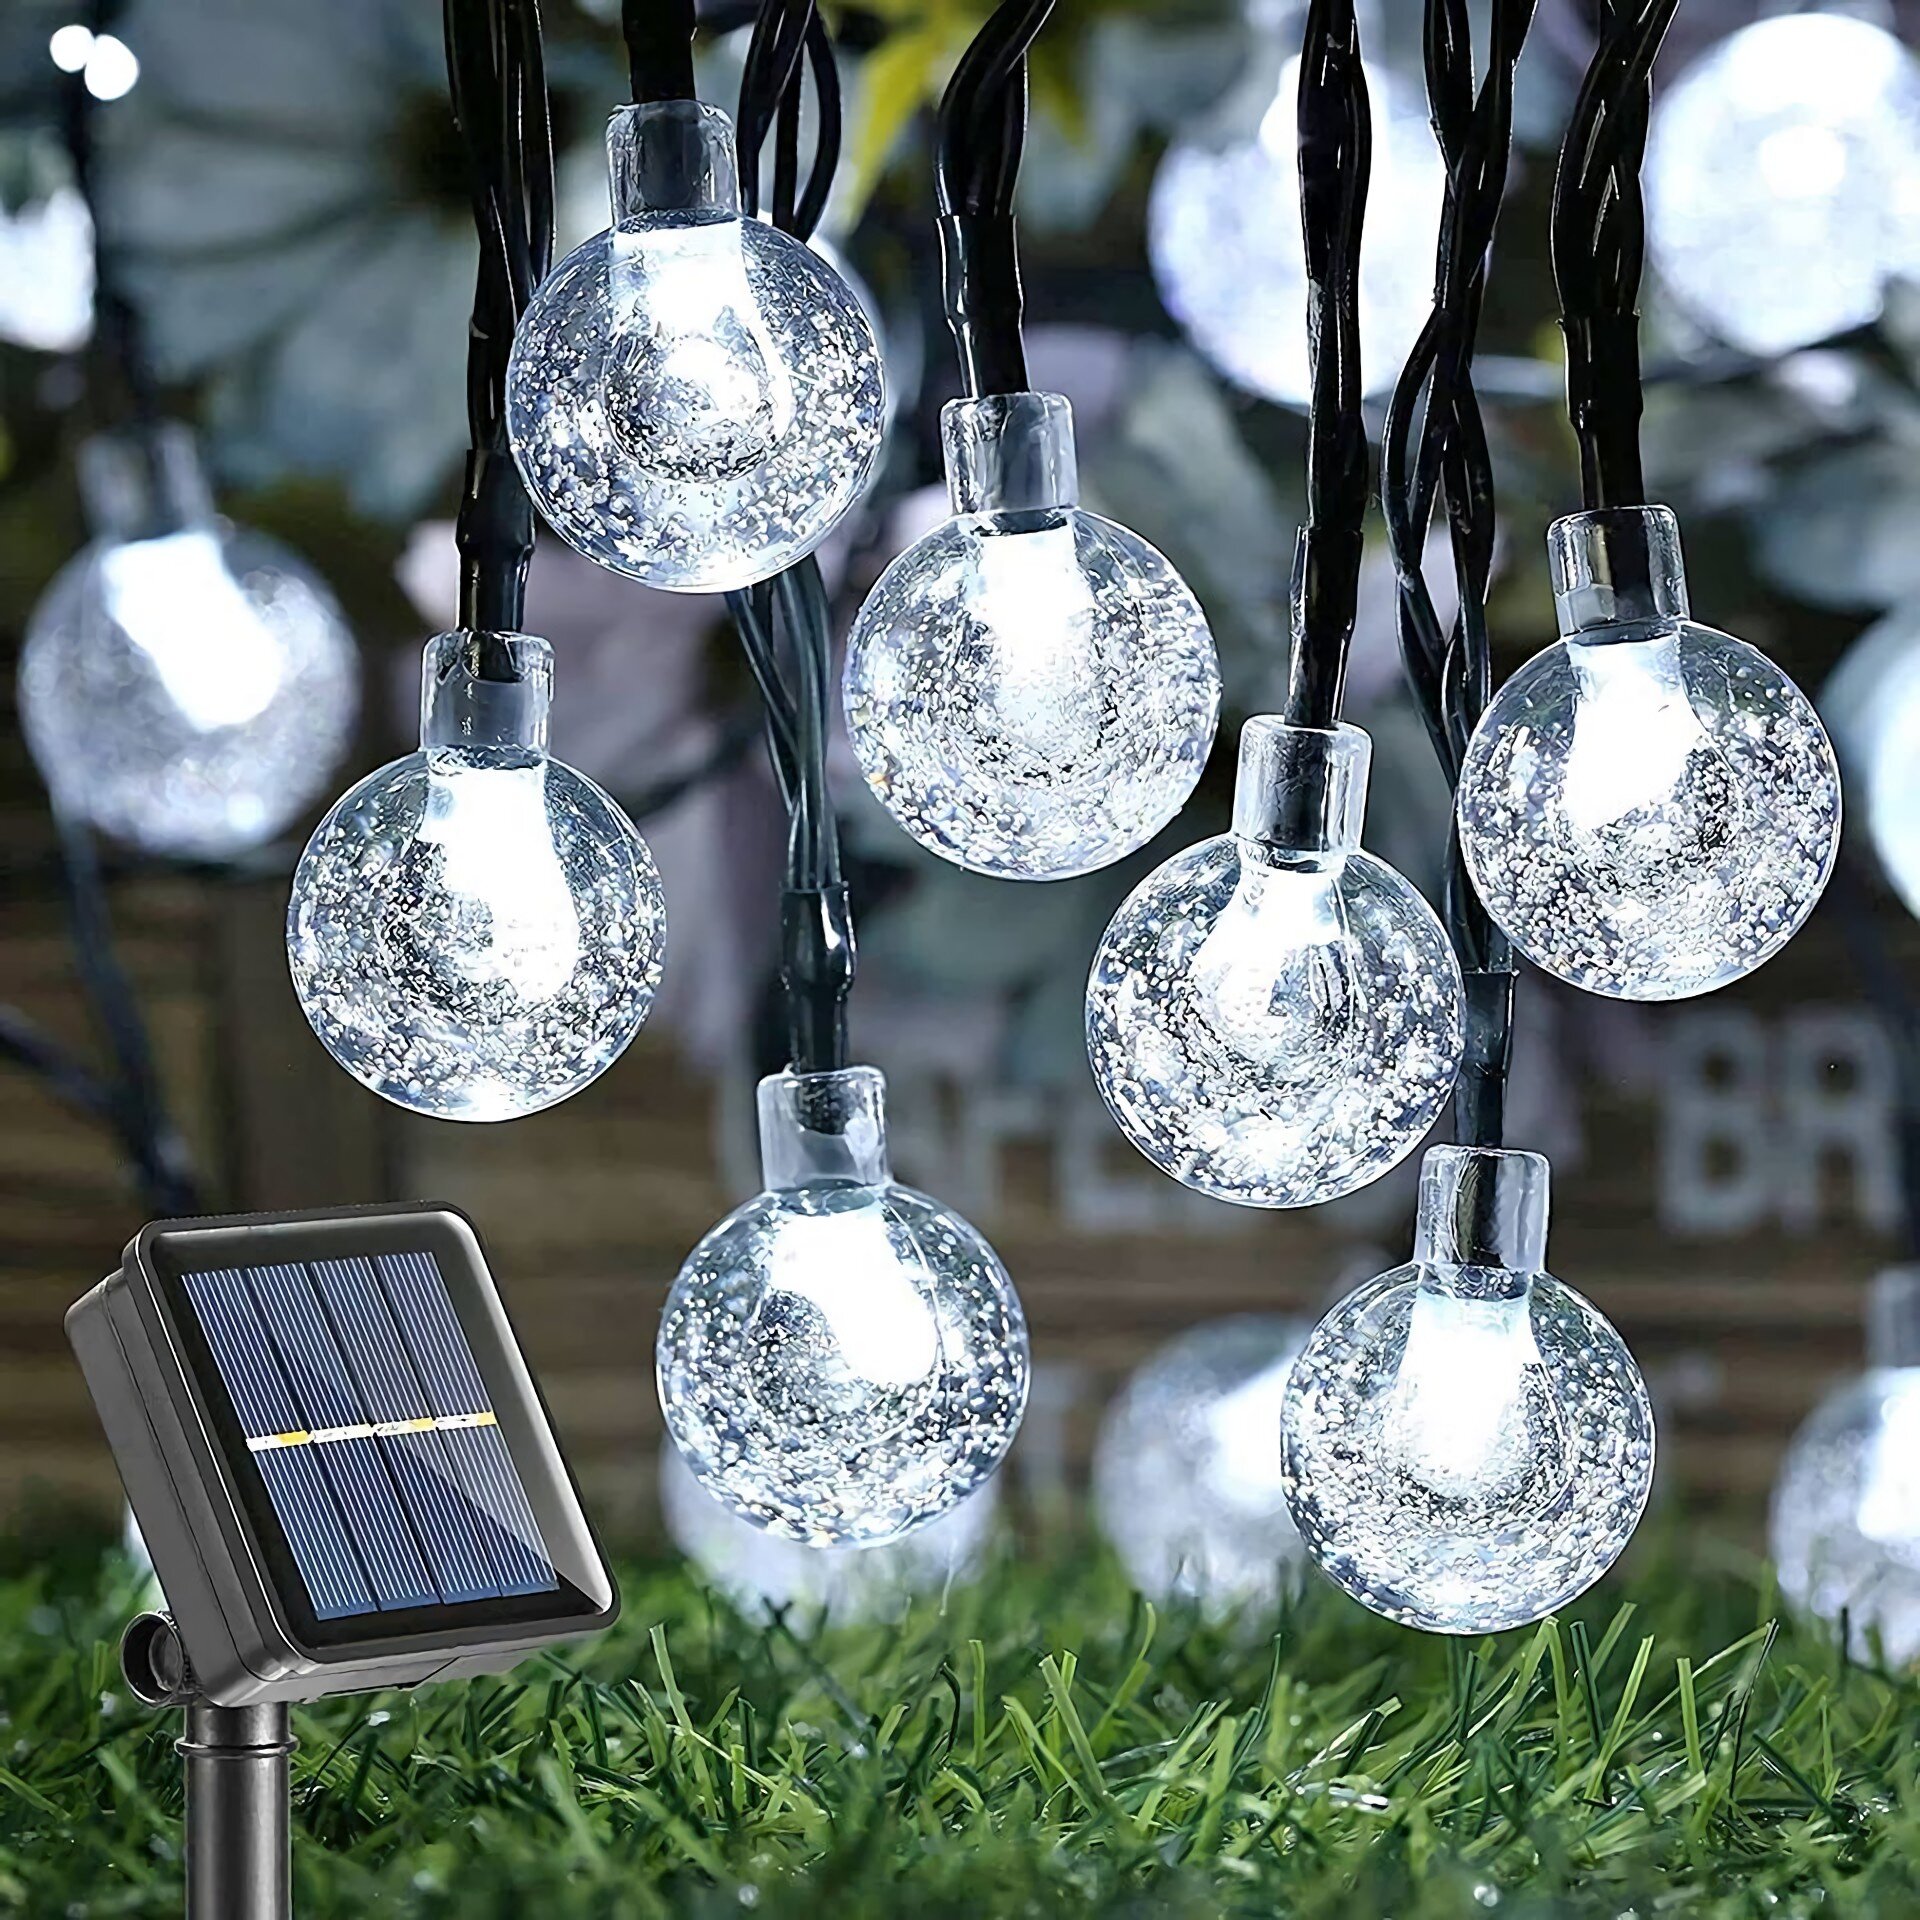 LED Fairy String Lights Battery Operated Wedding Party Outdoor Garden Home Decor 